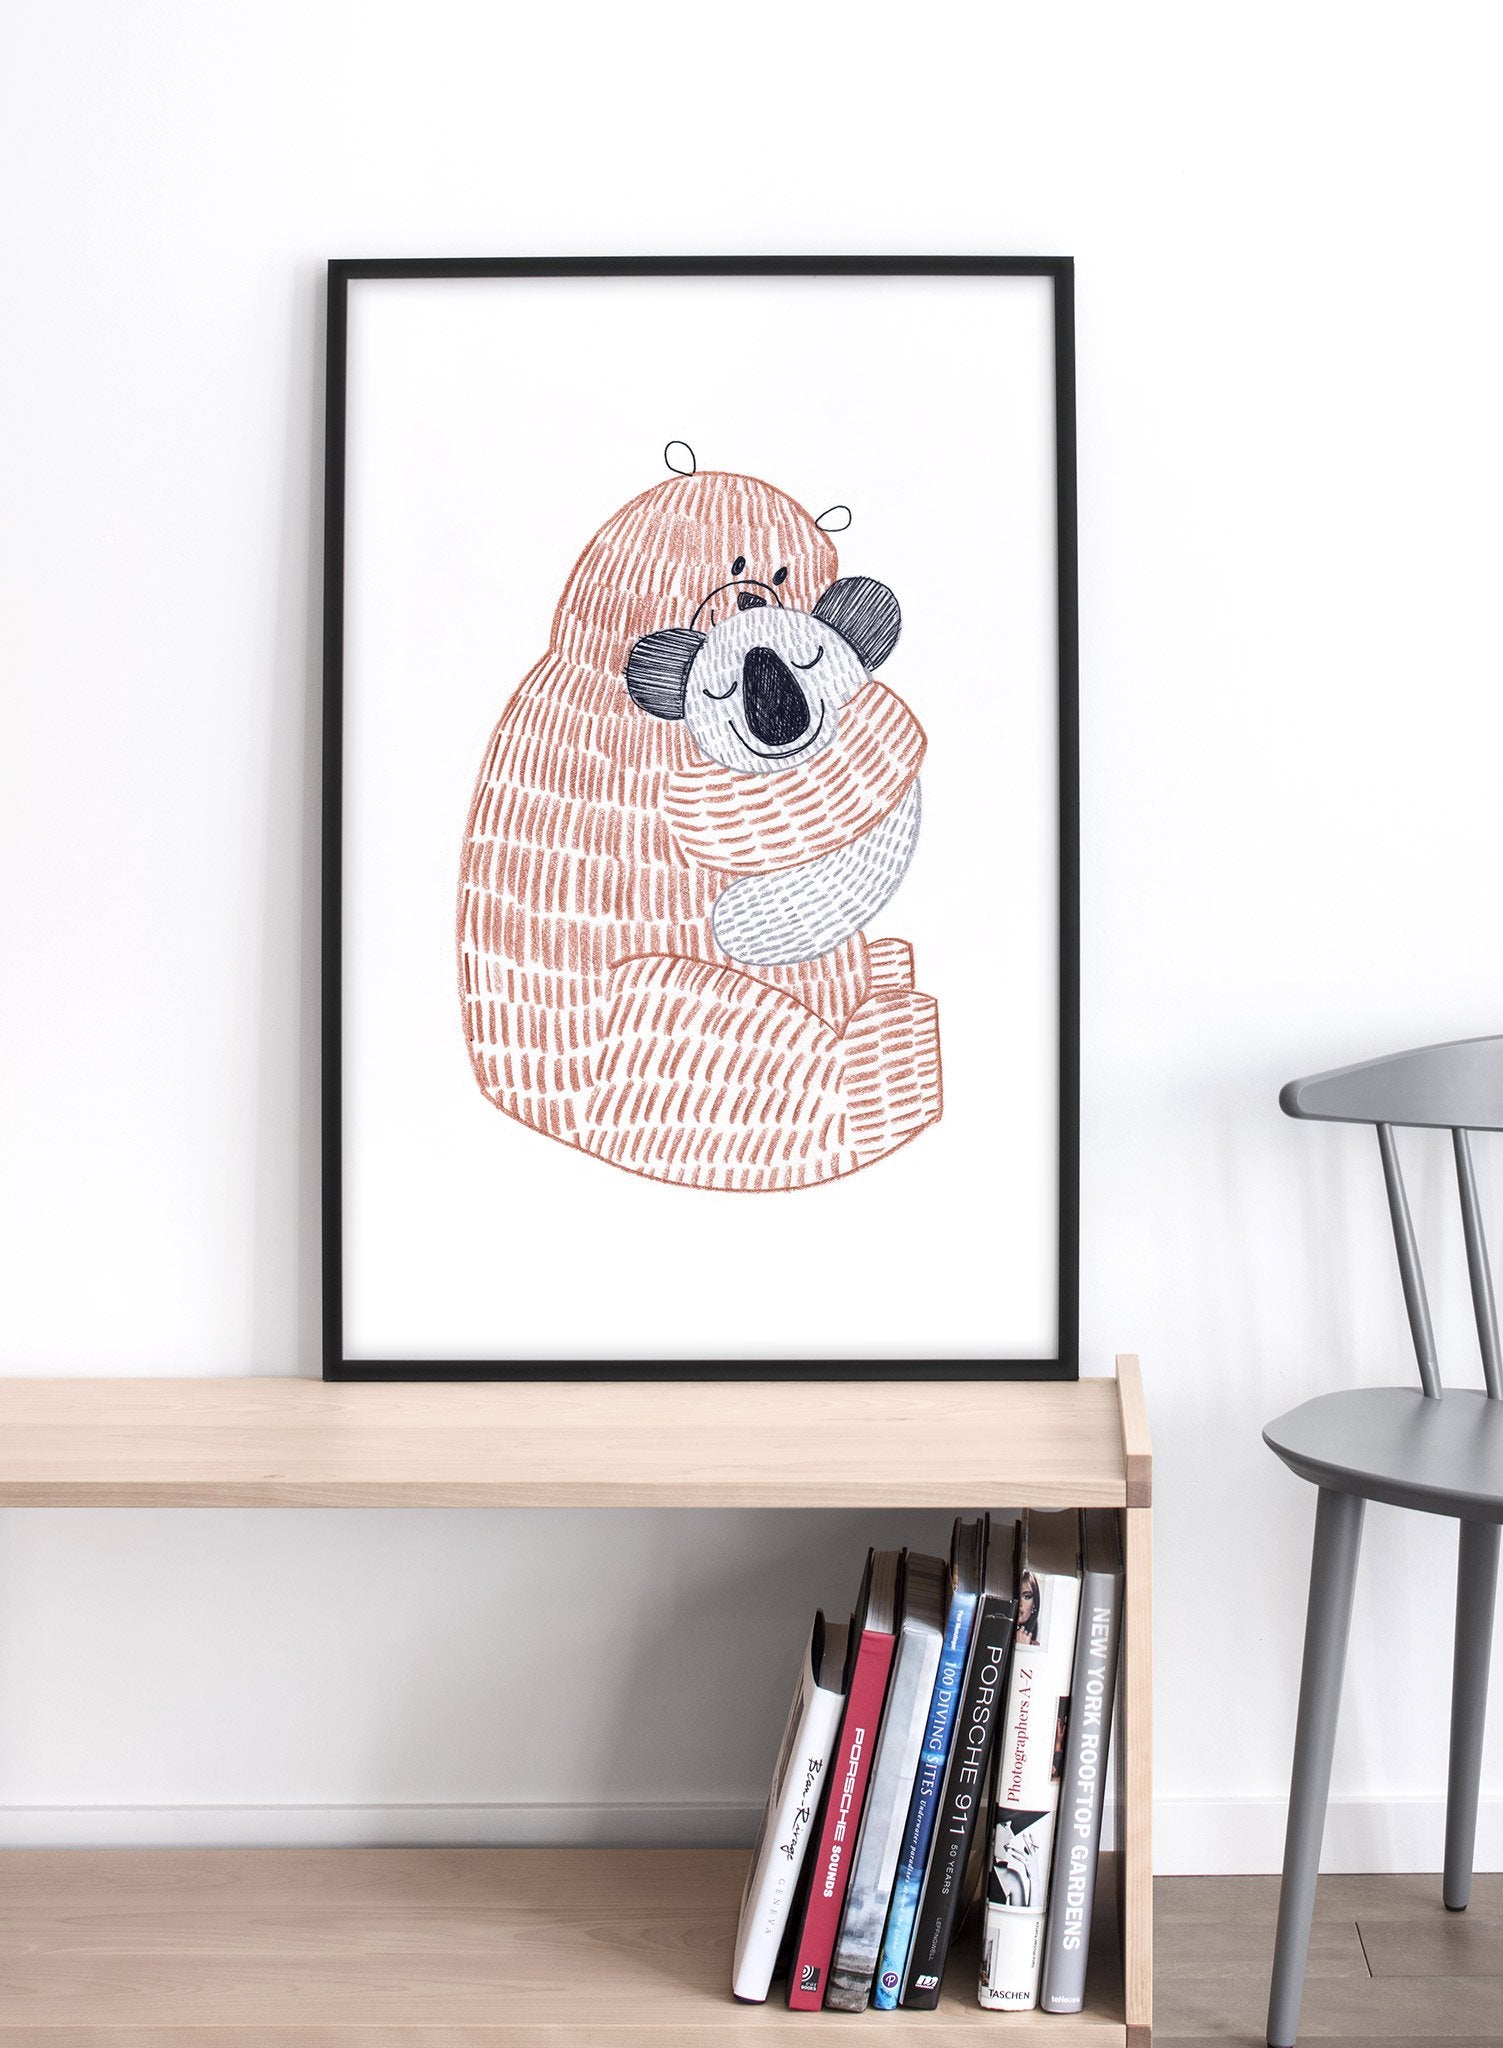 Kids nursery poster by Opposite Wall with Bear Hug illustration - Lifestyle - Living Room